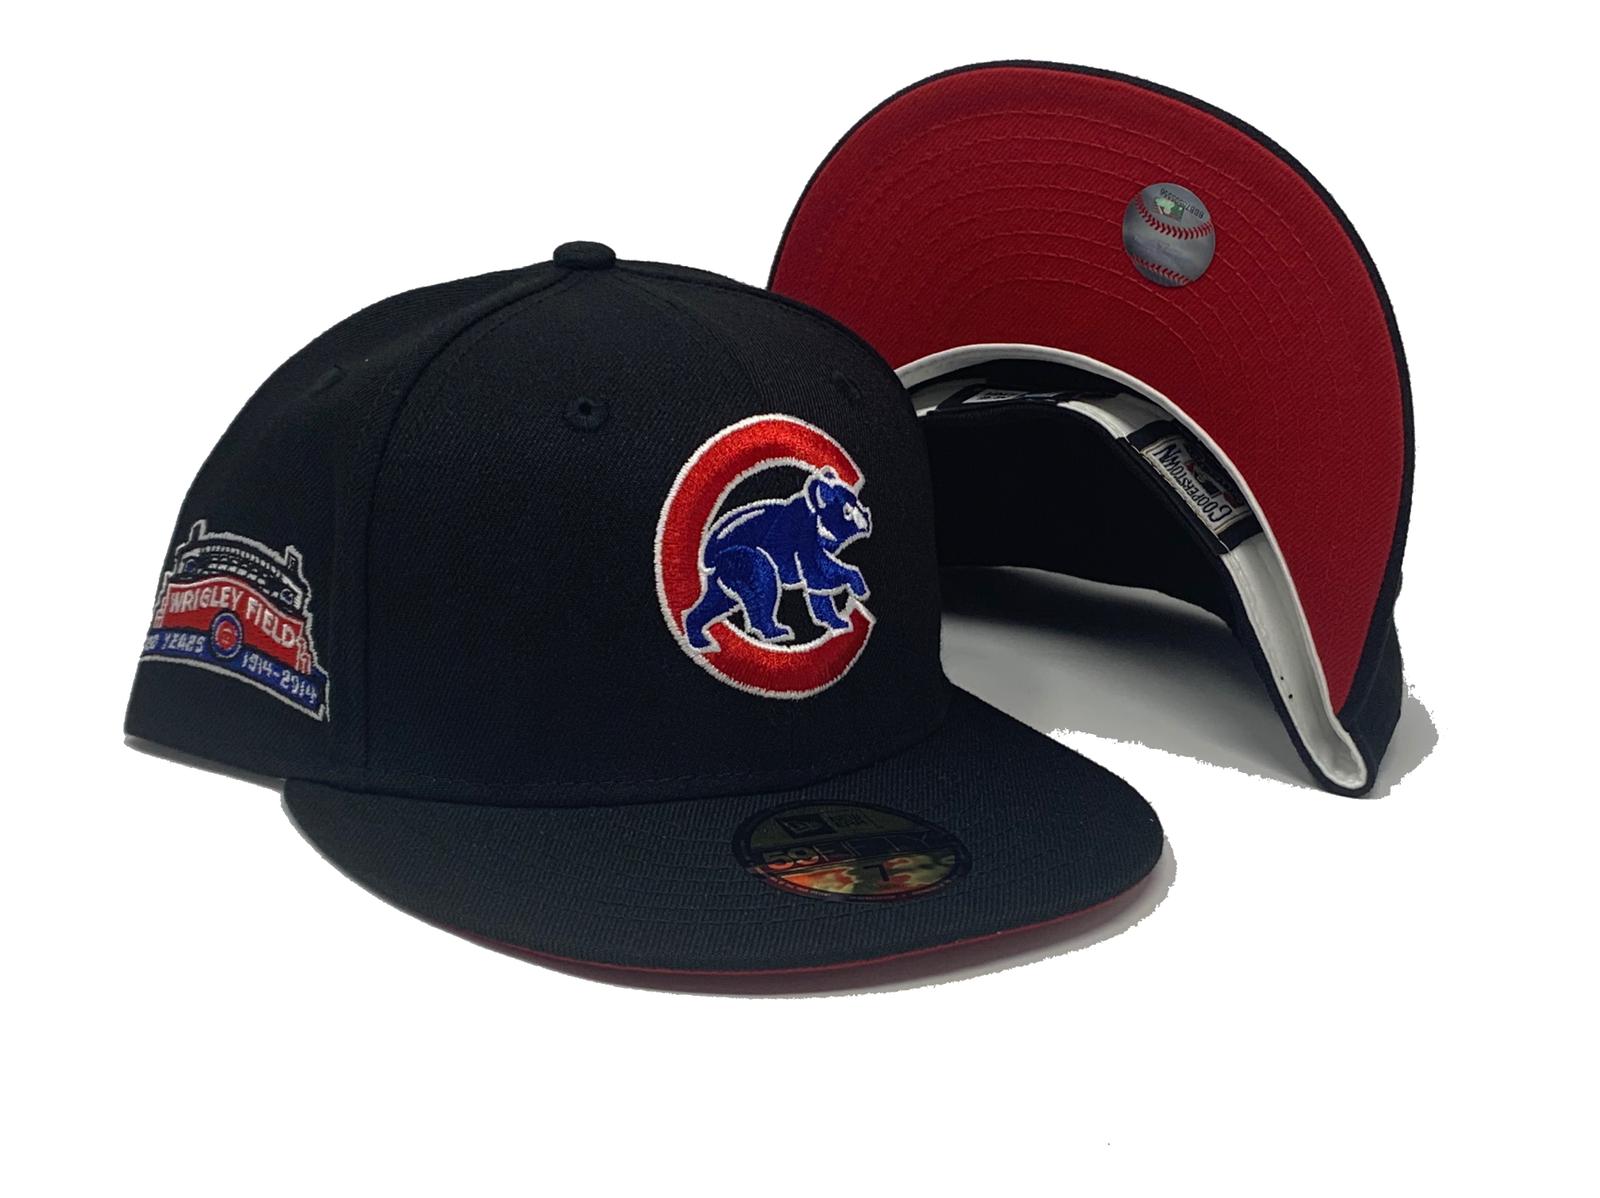 New Era 59FIFTY Black Dome Chicago Cubs Wrigley Field Patch Logo Hat - Black Black / 6 7/8